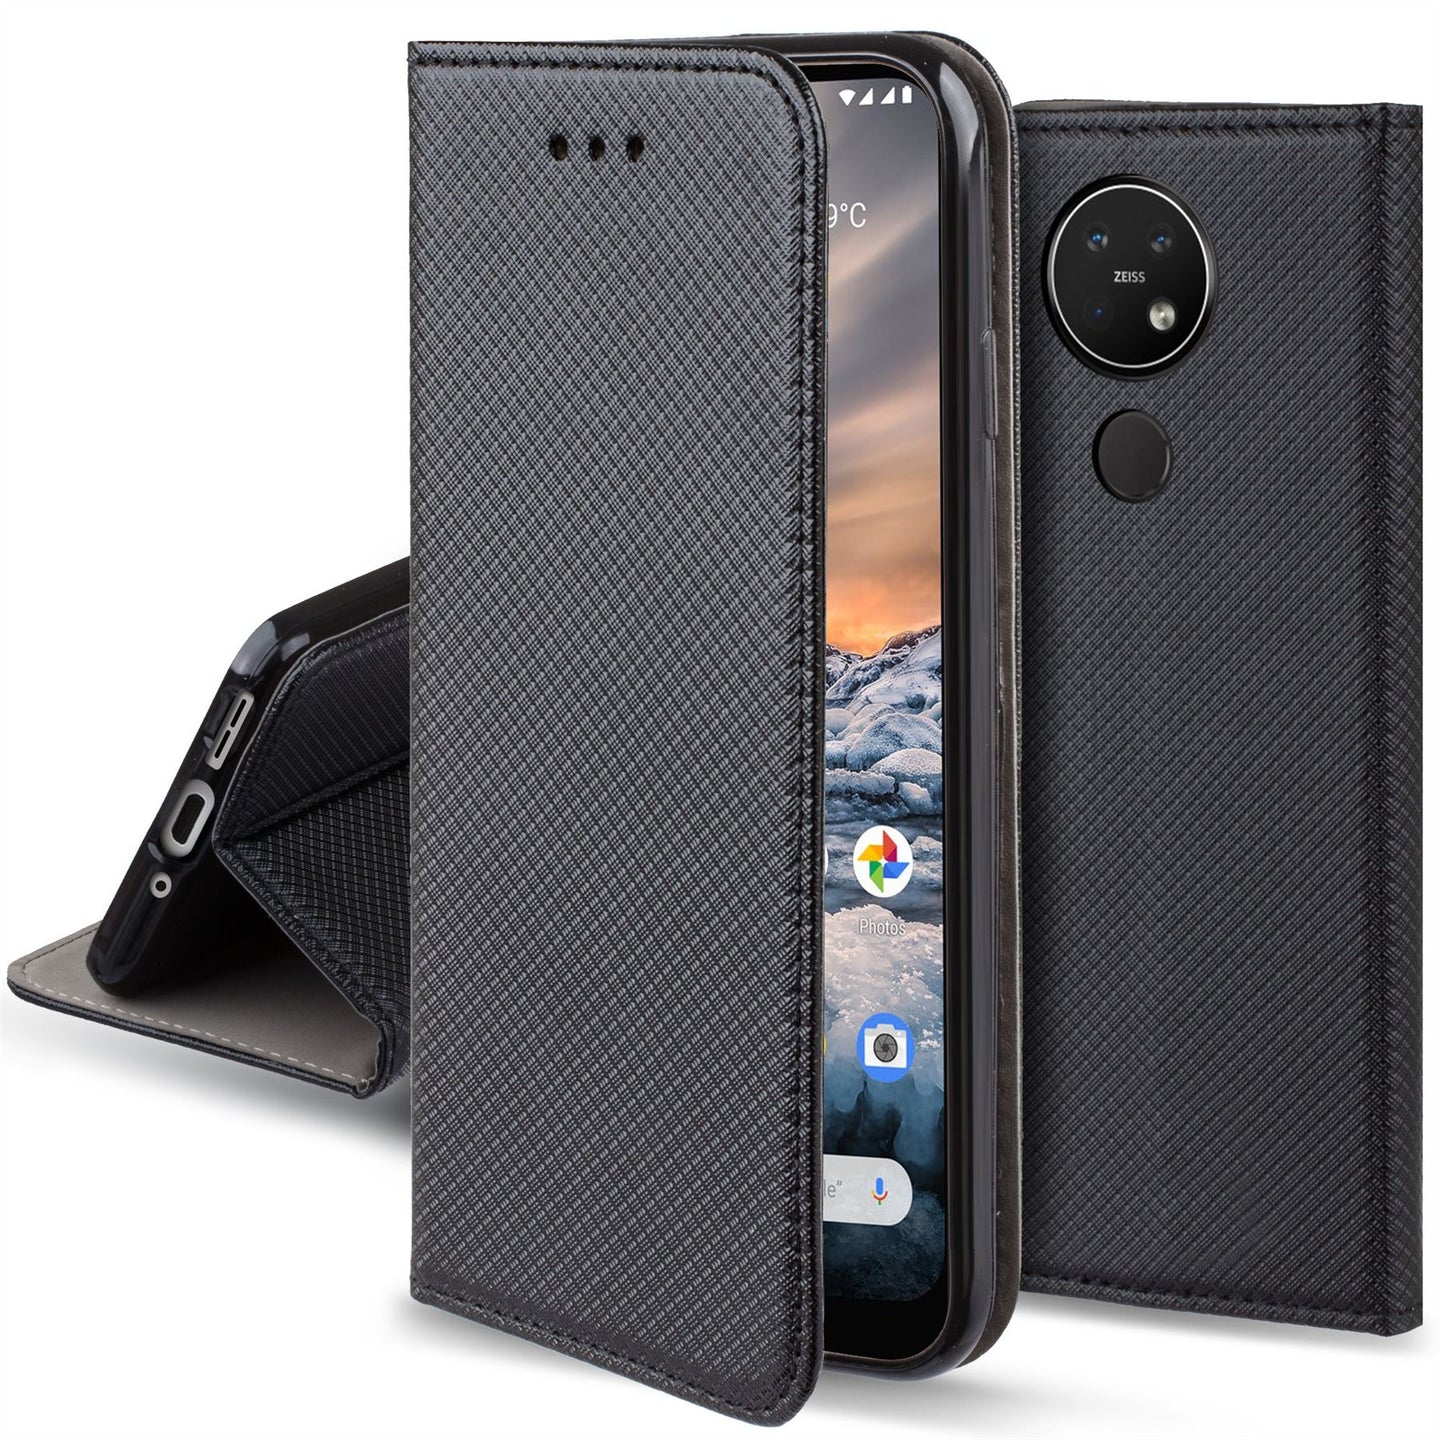 Moozy Case Flip Cover for Nokia 7.2, Nokia 6.2, Black - Smart Magnetic Flip Case with Card Holder and Stand